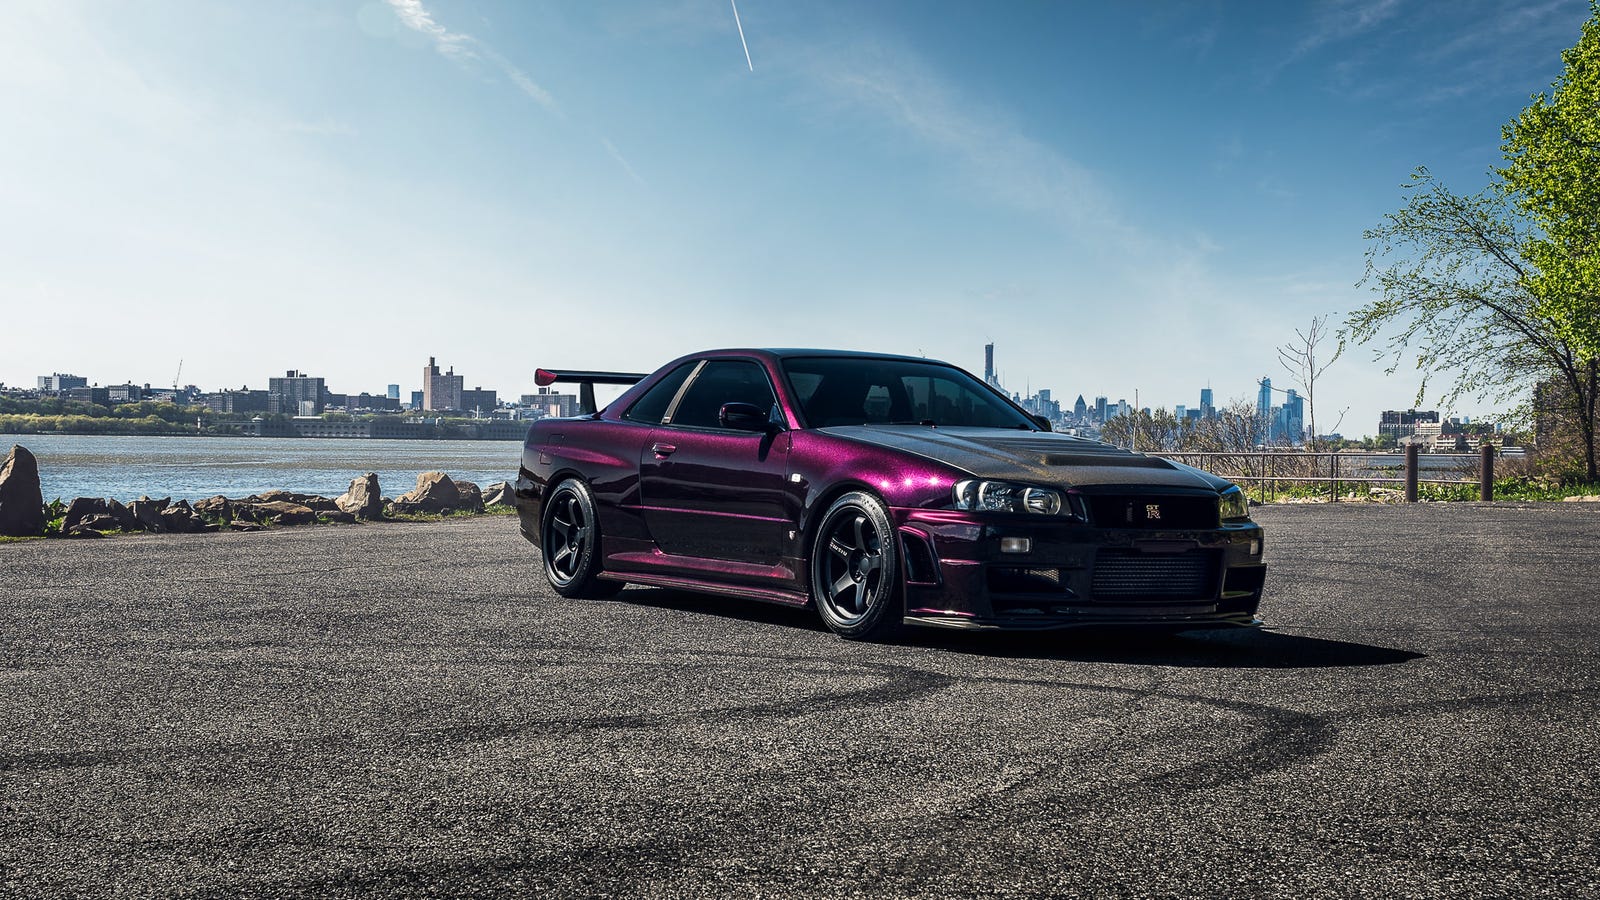 Your Ridiculously Awesome Nissan R34 GT-R Wallpapers Are Here